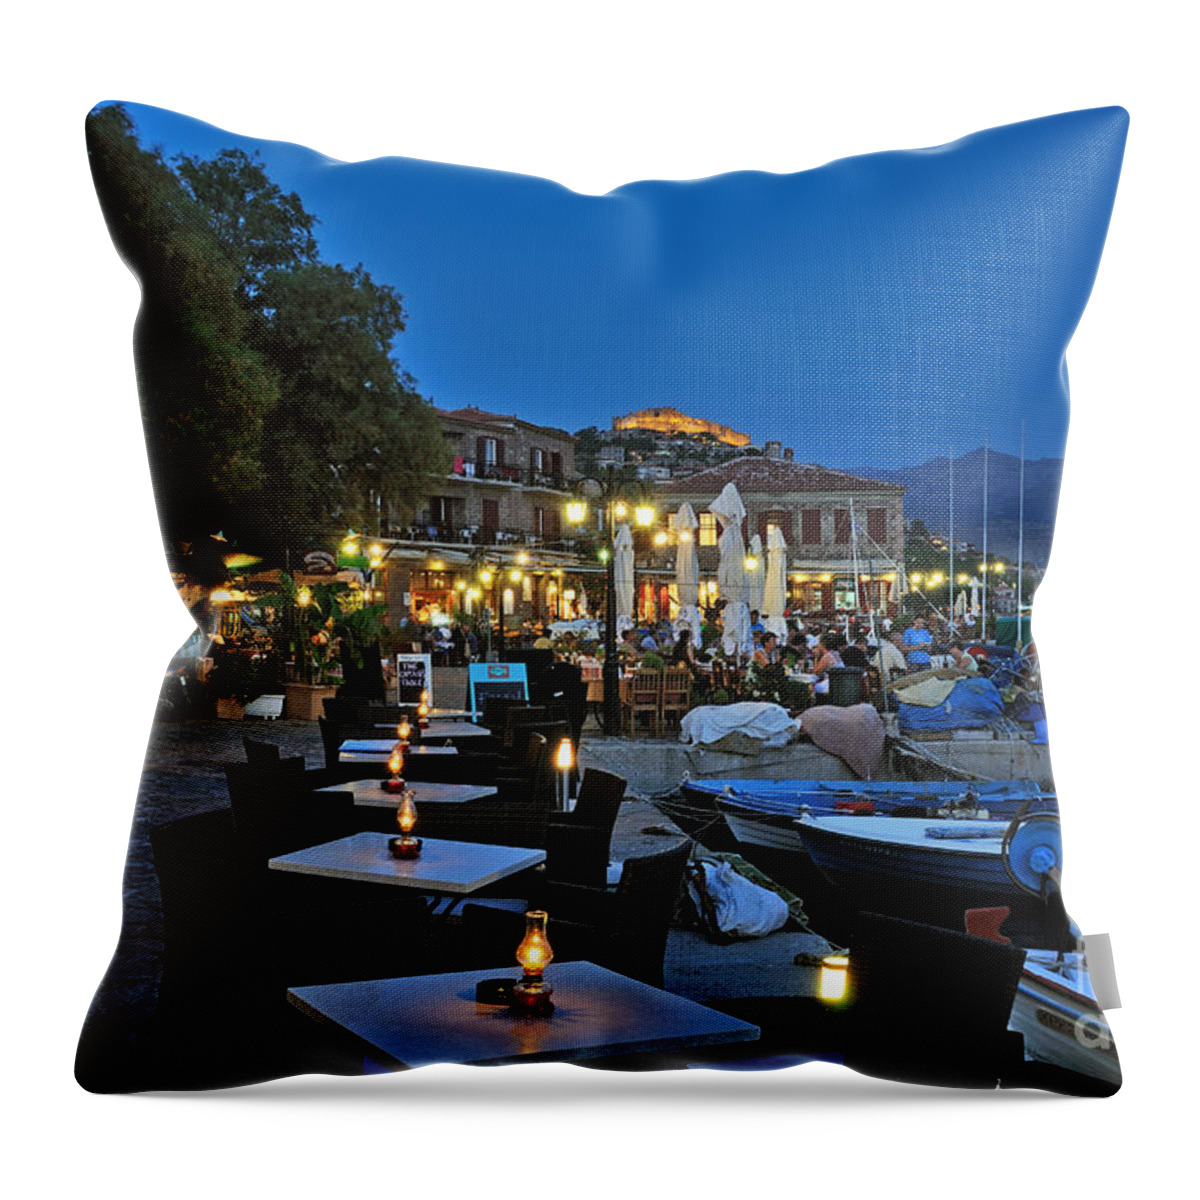 Lesvos; Lesbos; Molyvos; Molivos; Mithymna; Methymna; Village; Town; People; Tourists; Port; Harbor; Castle; Fortress; Islands; Greece; Greek; Hellas; Aegean; Summer; Holidays; Vacation; Tourism; Touristic; Travel; Trip; Island Throw Pillow featuring the photograph Molyvos village during dusk time #2 by George Atsametakis